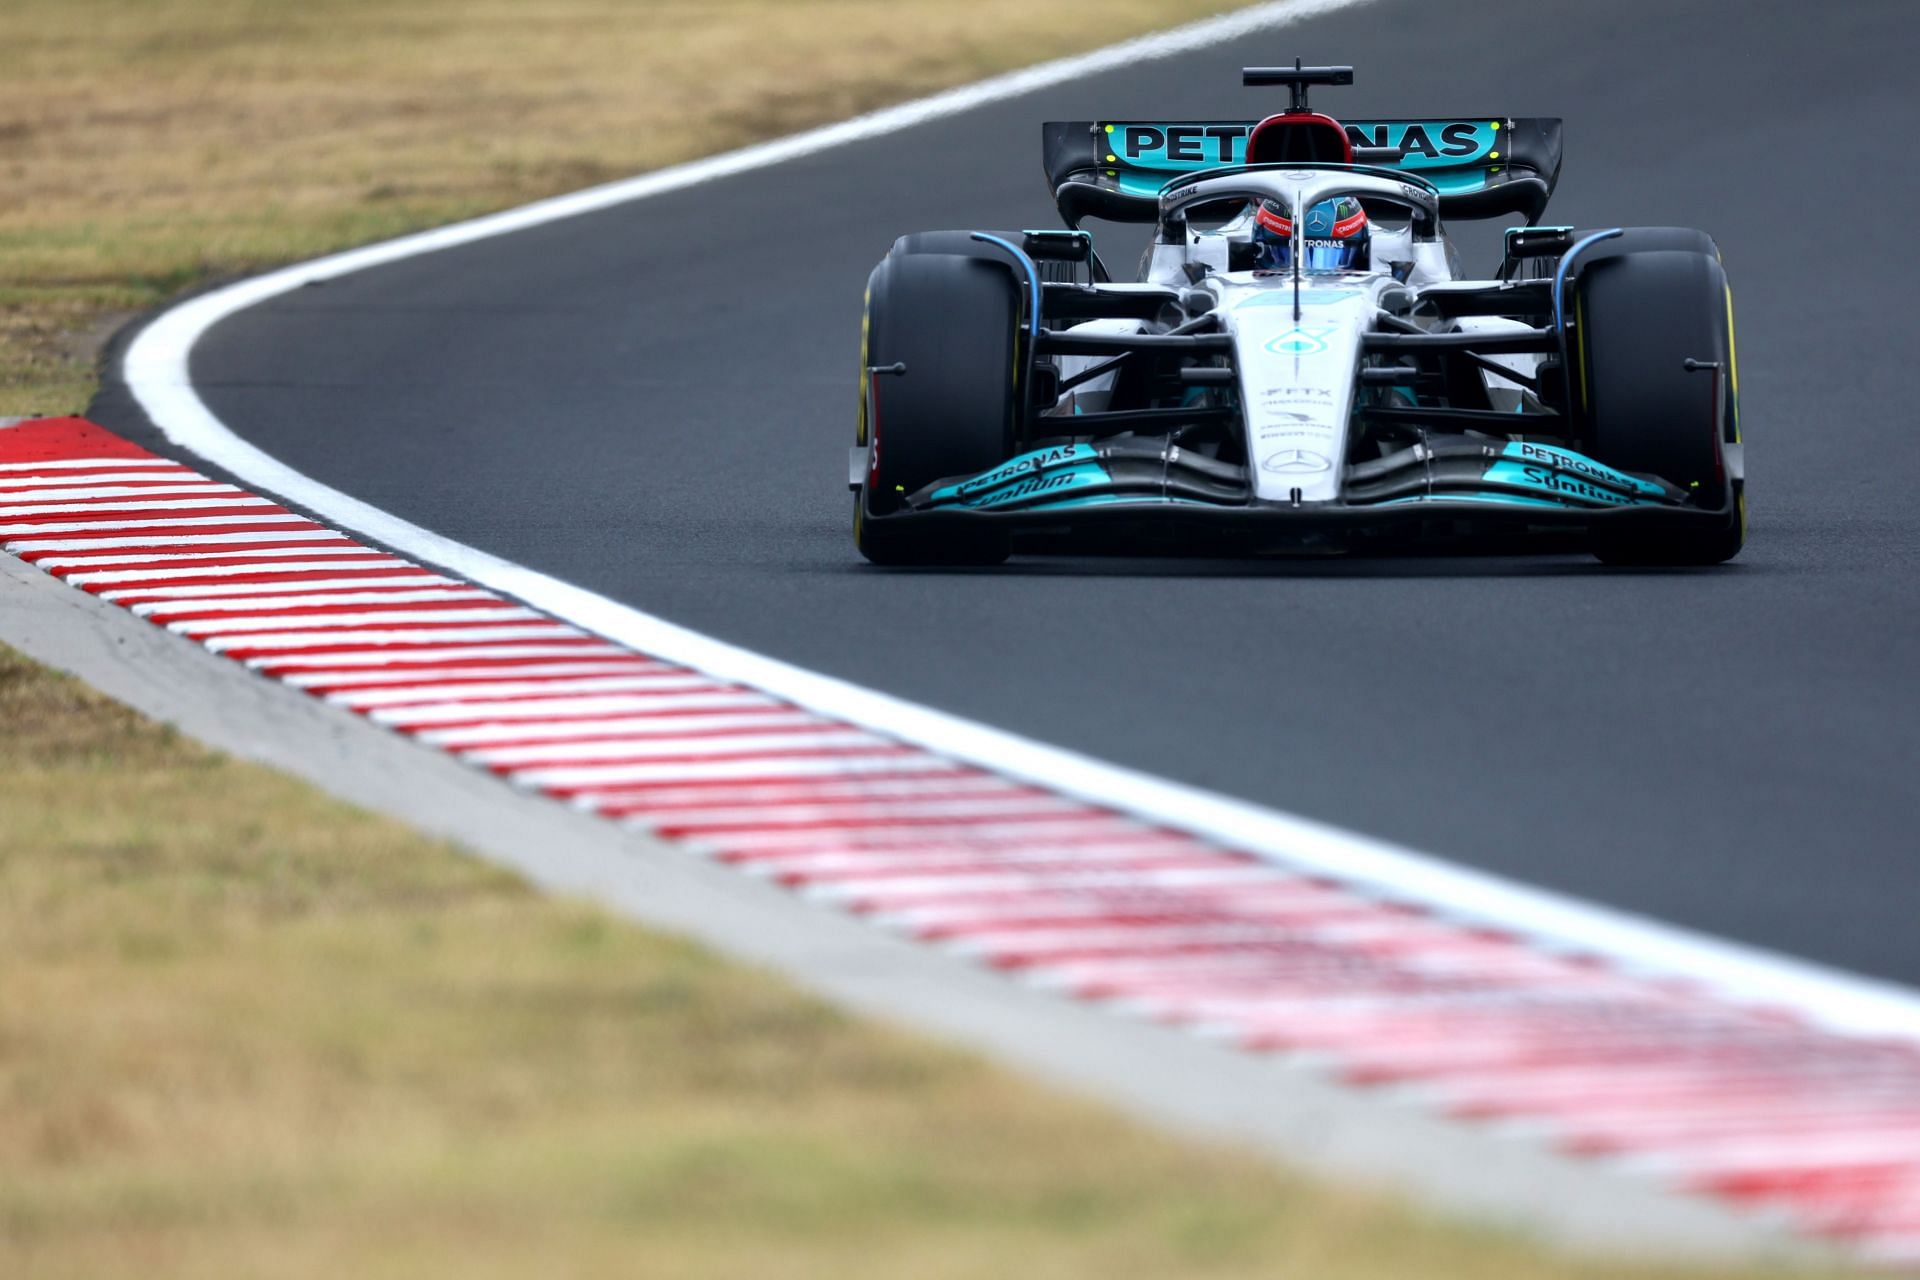 Mercedes do not intend to build a low-weight chassis.